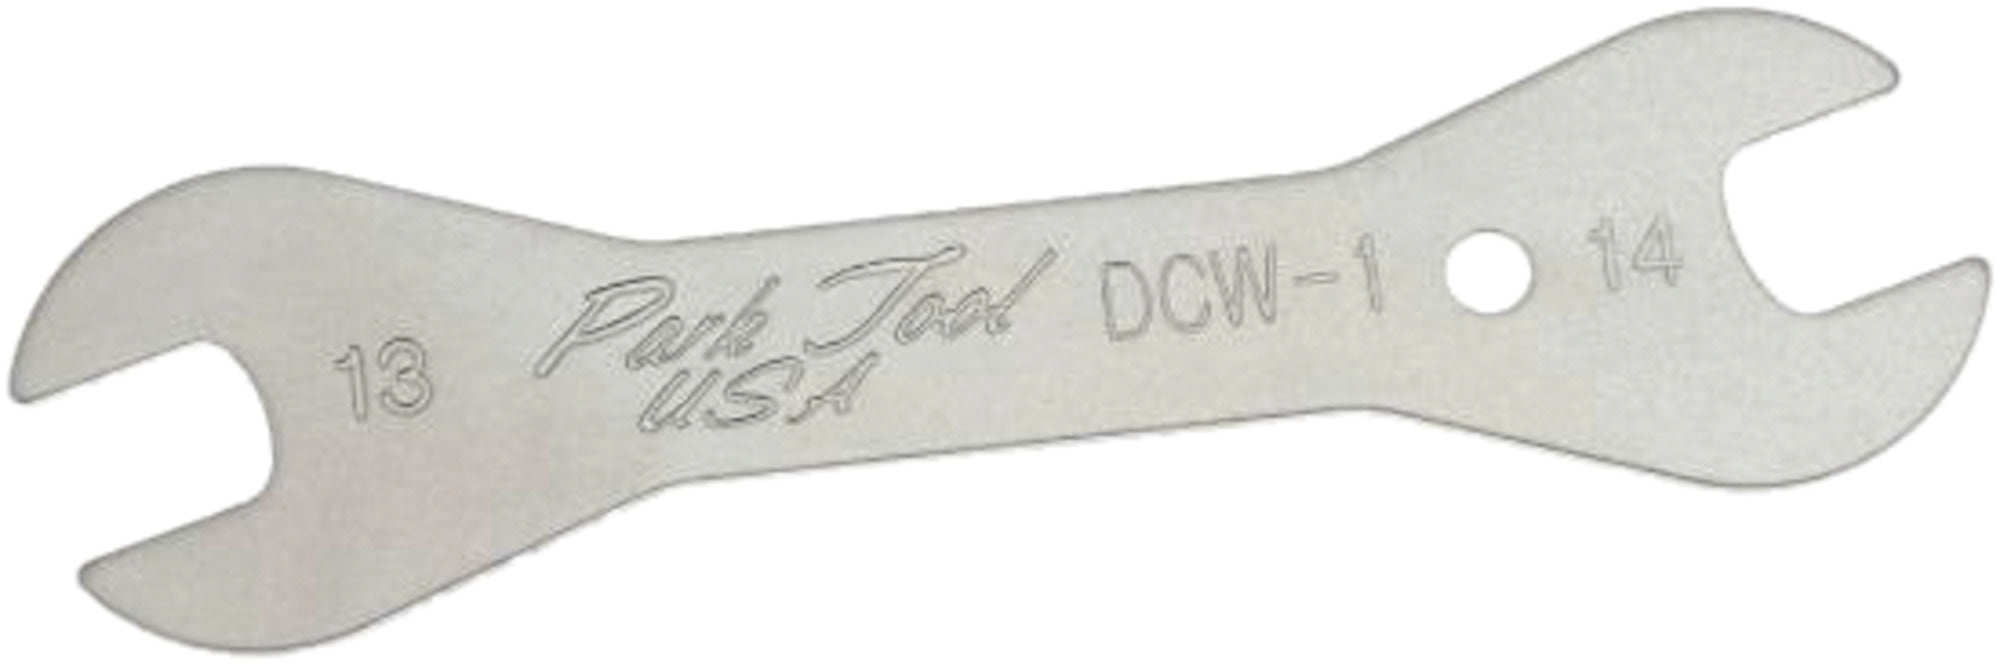 PARK DCW-3 CONE WRENCH 17-18MM